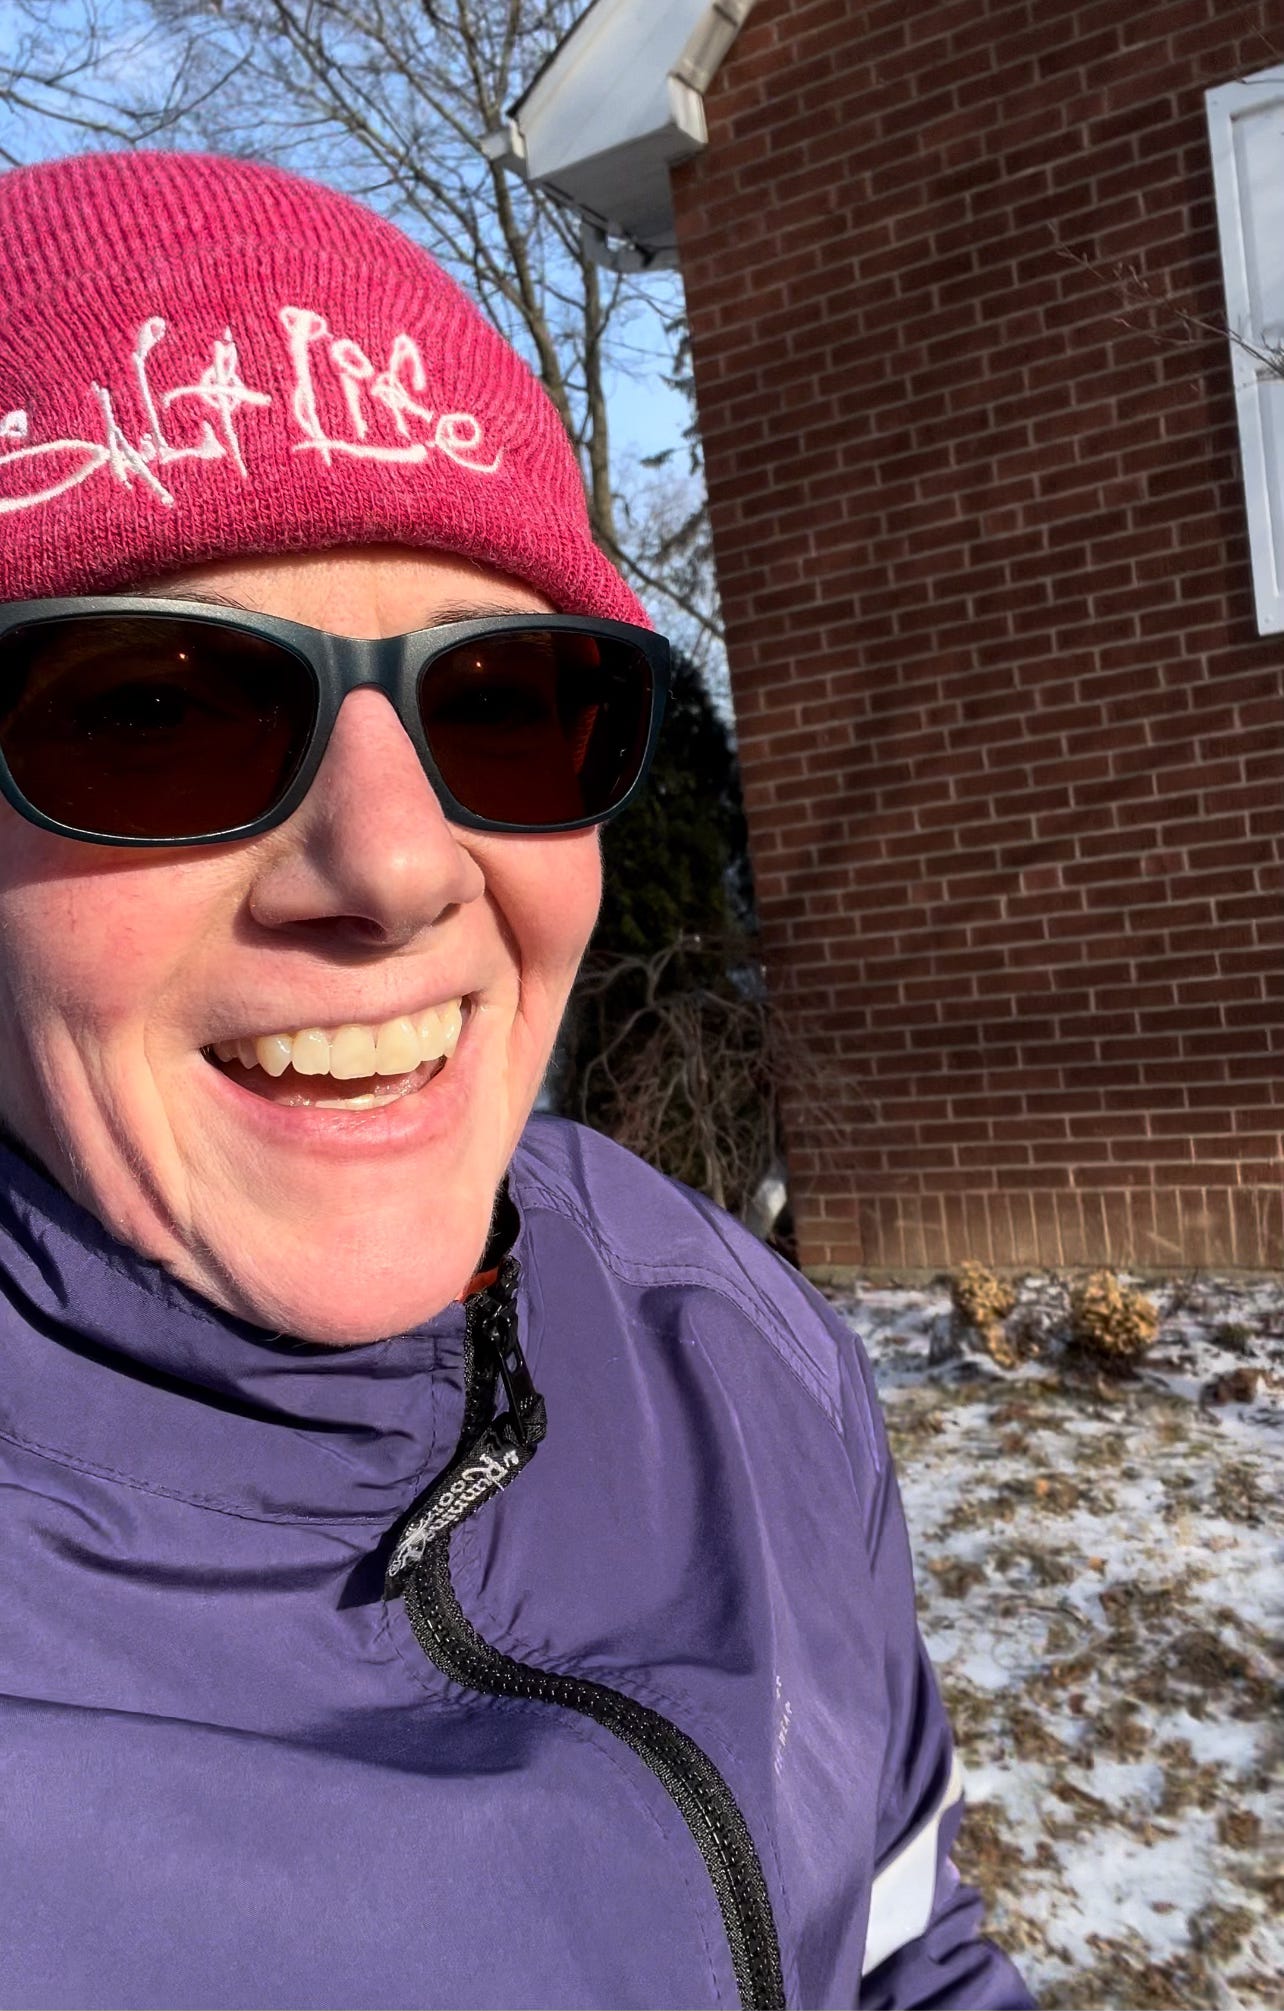 Woman smiling, running in the cold wearing a pink toque, purple jacket and sunglasses